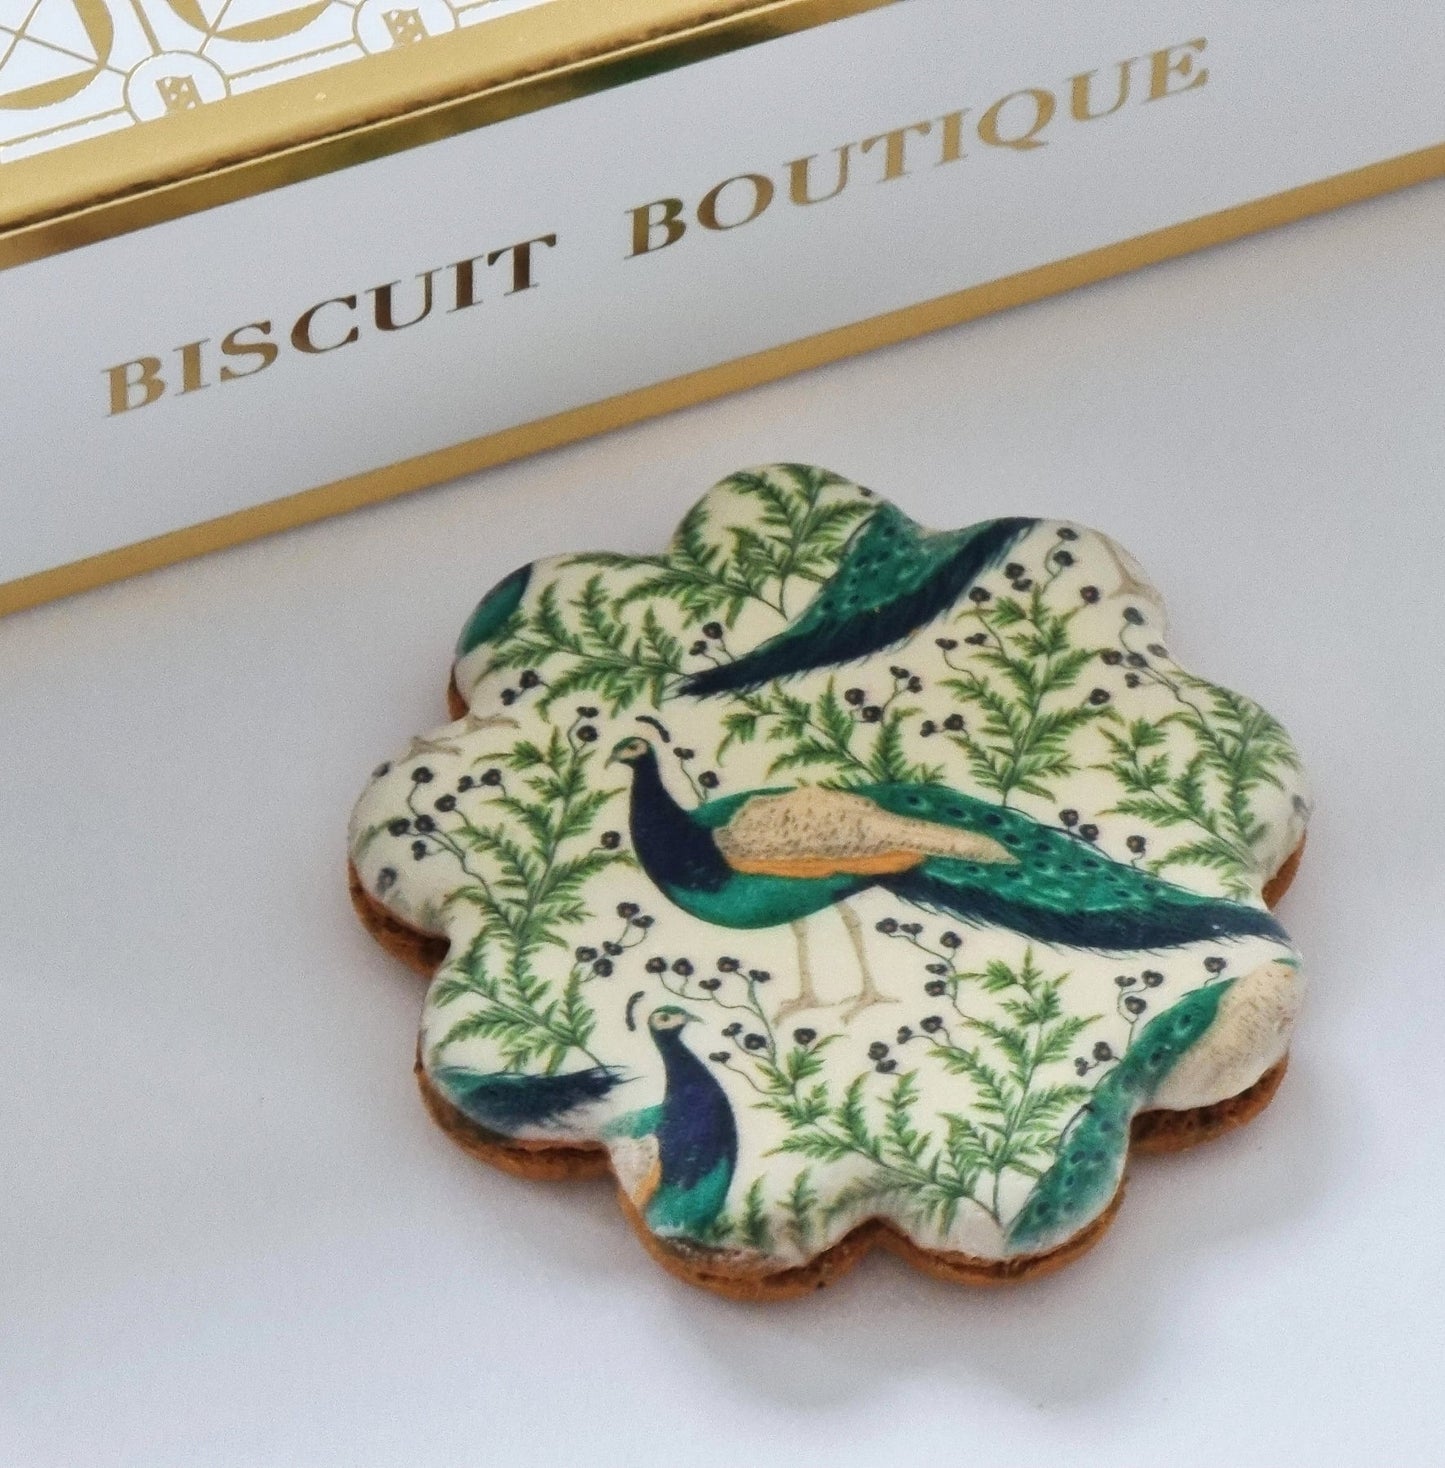 Peacock Motif - Speculoos Biscuits with a twist